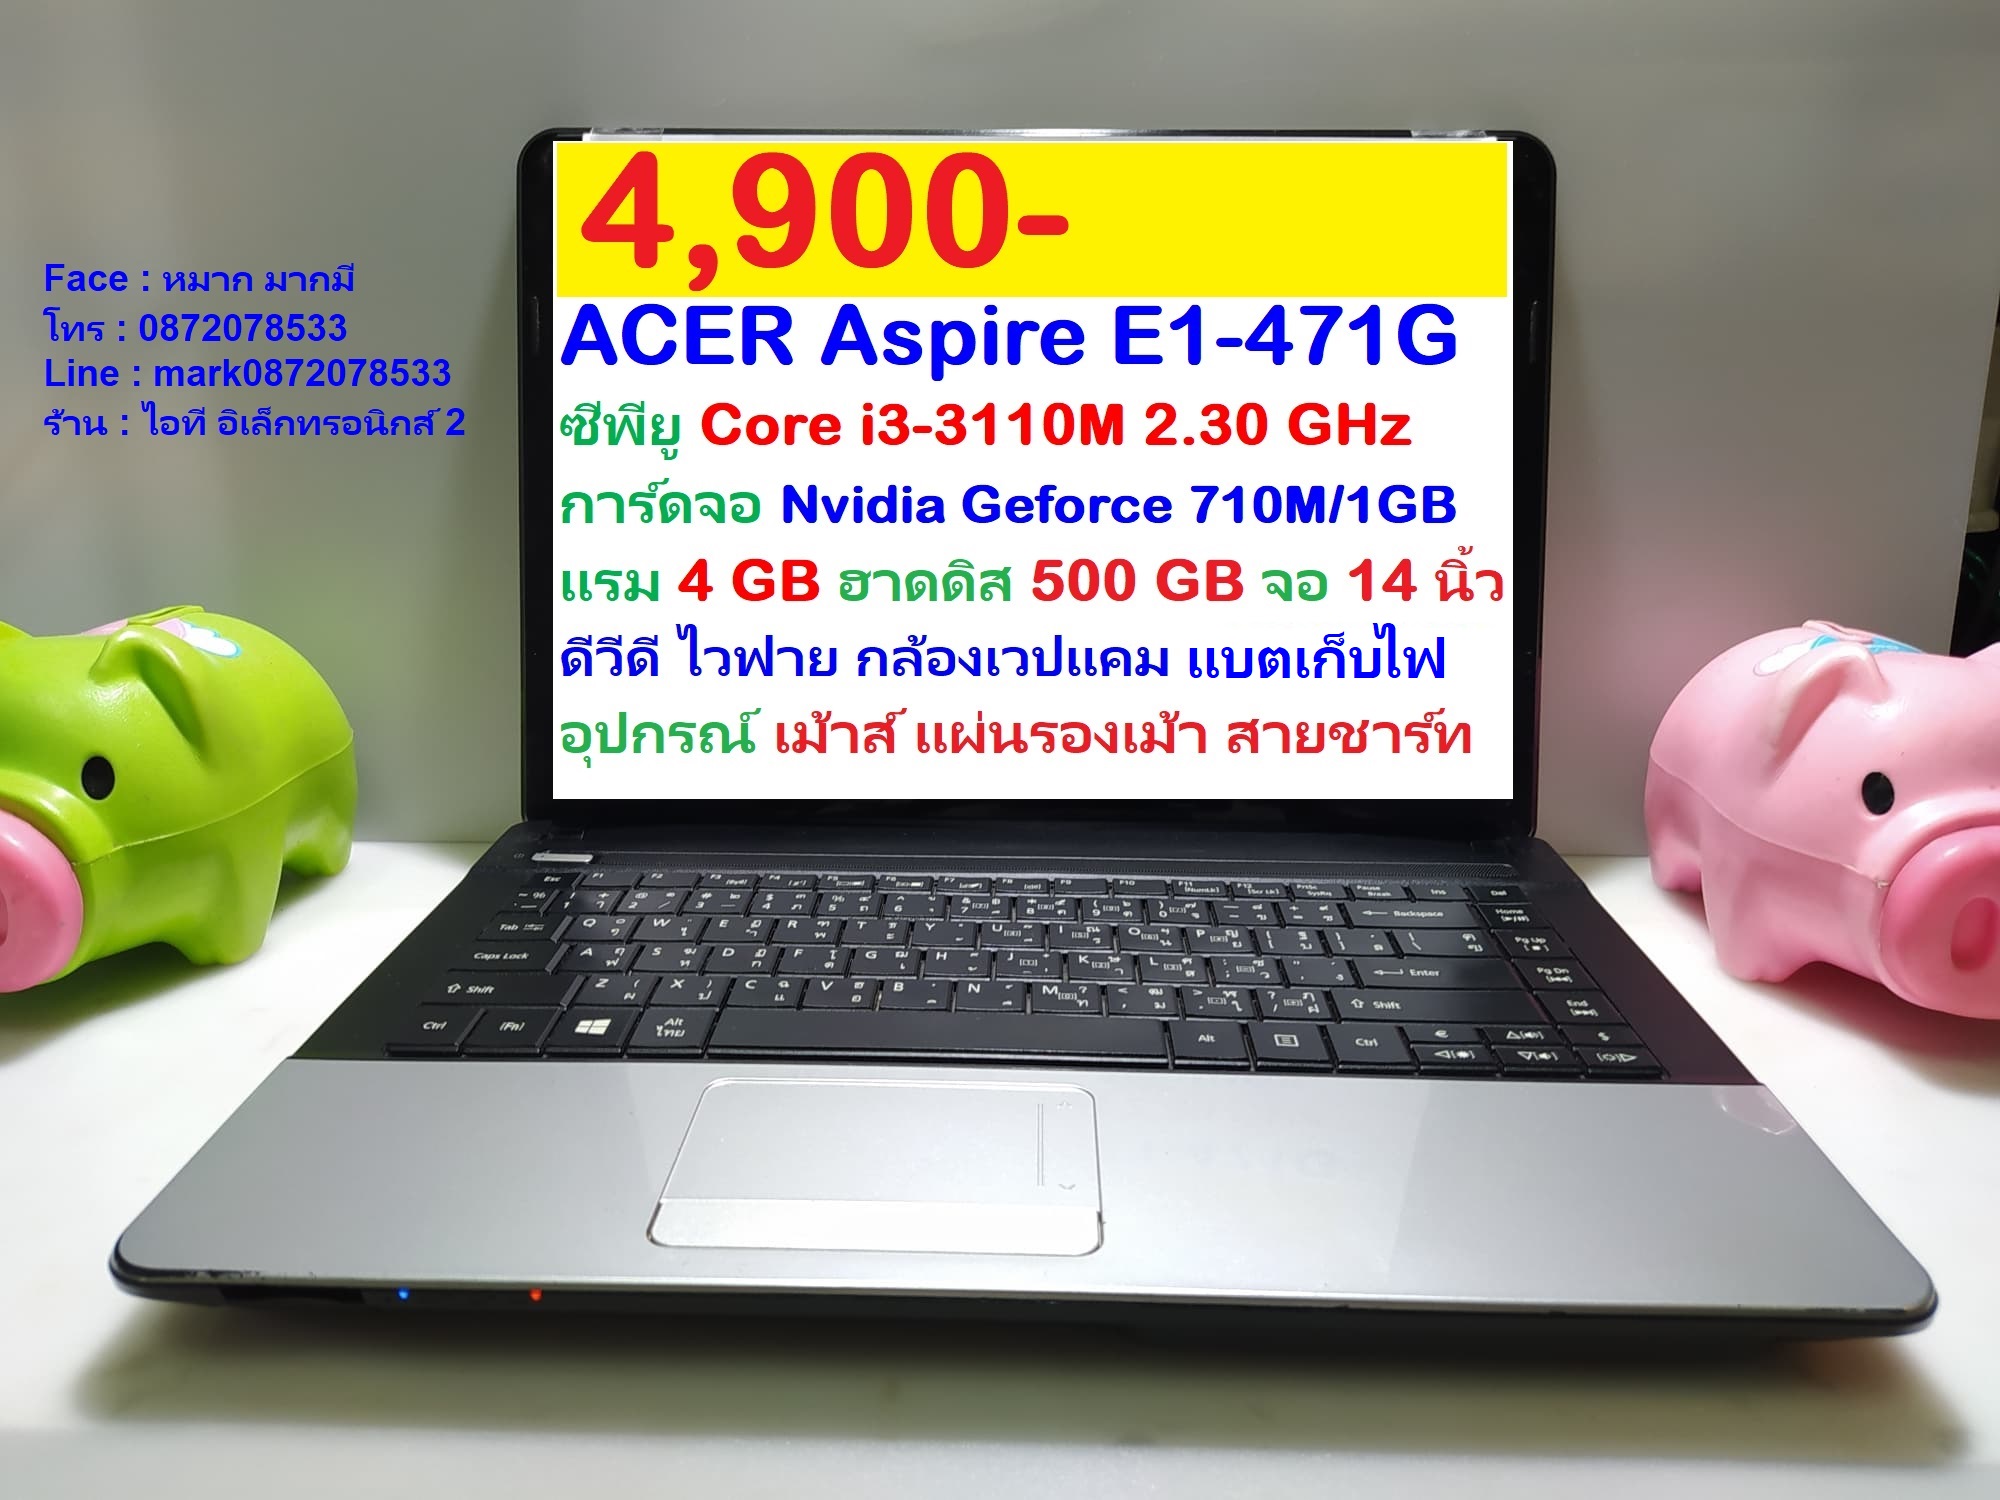 ACER Aspire E1-471G Core i3-3110M 2.30 GHz รูปที่ 1